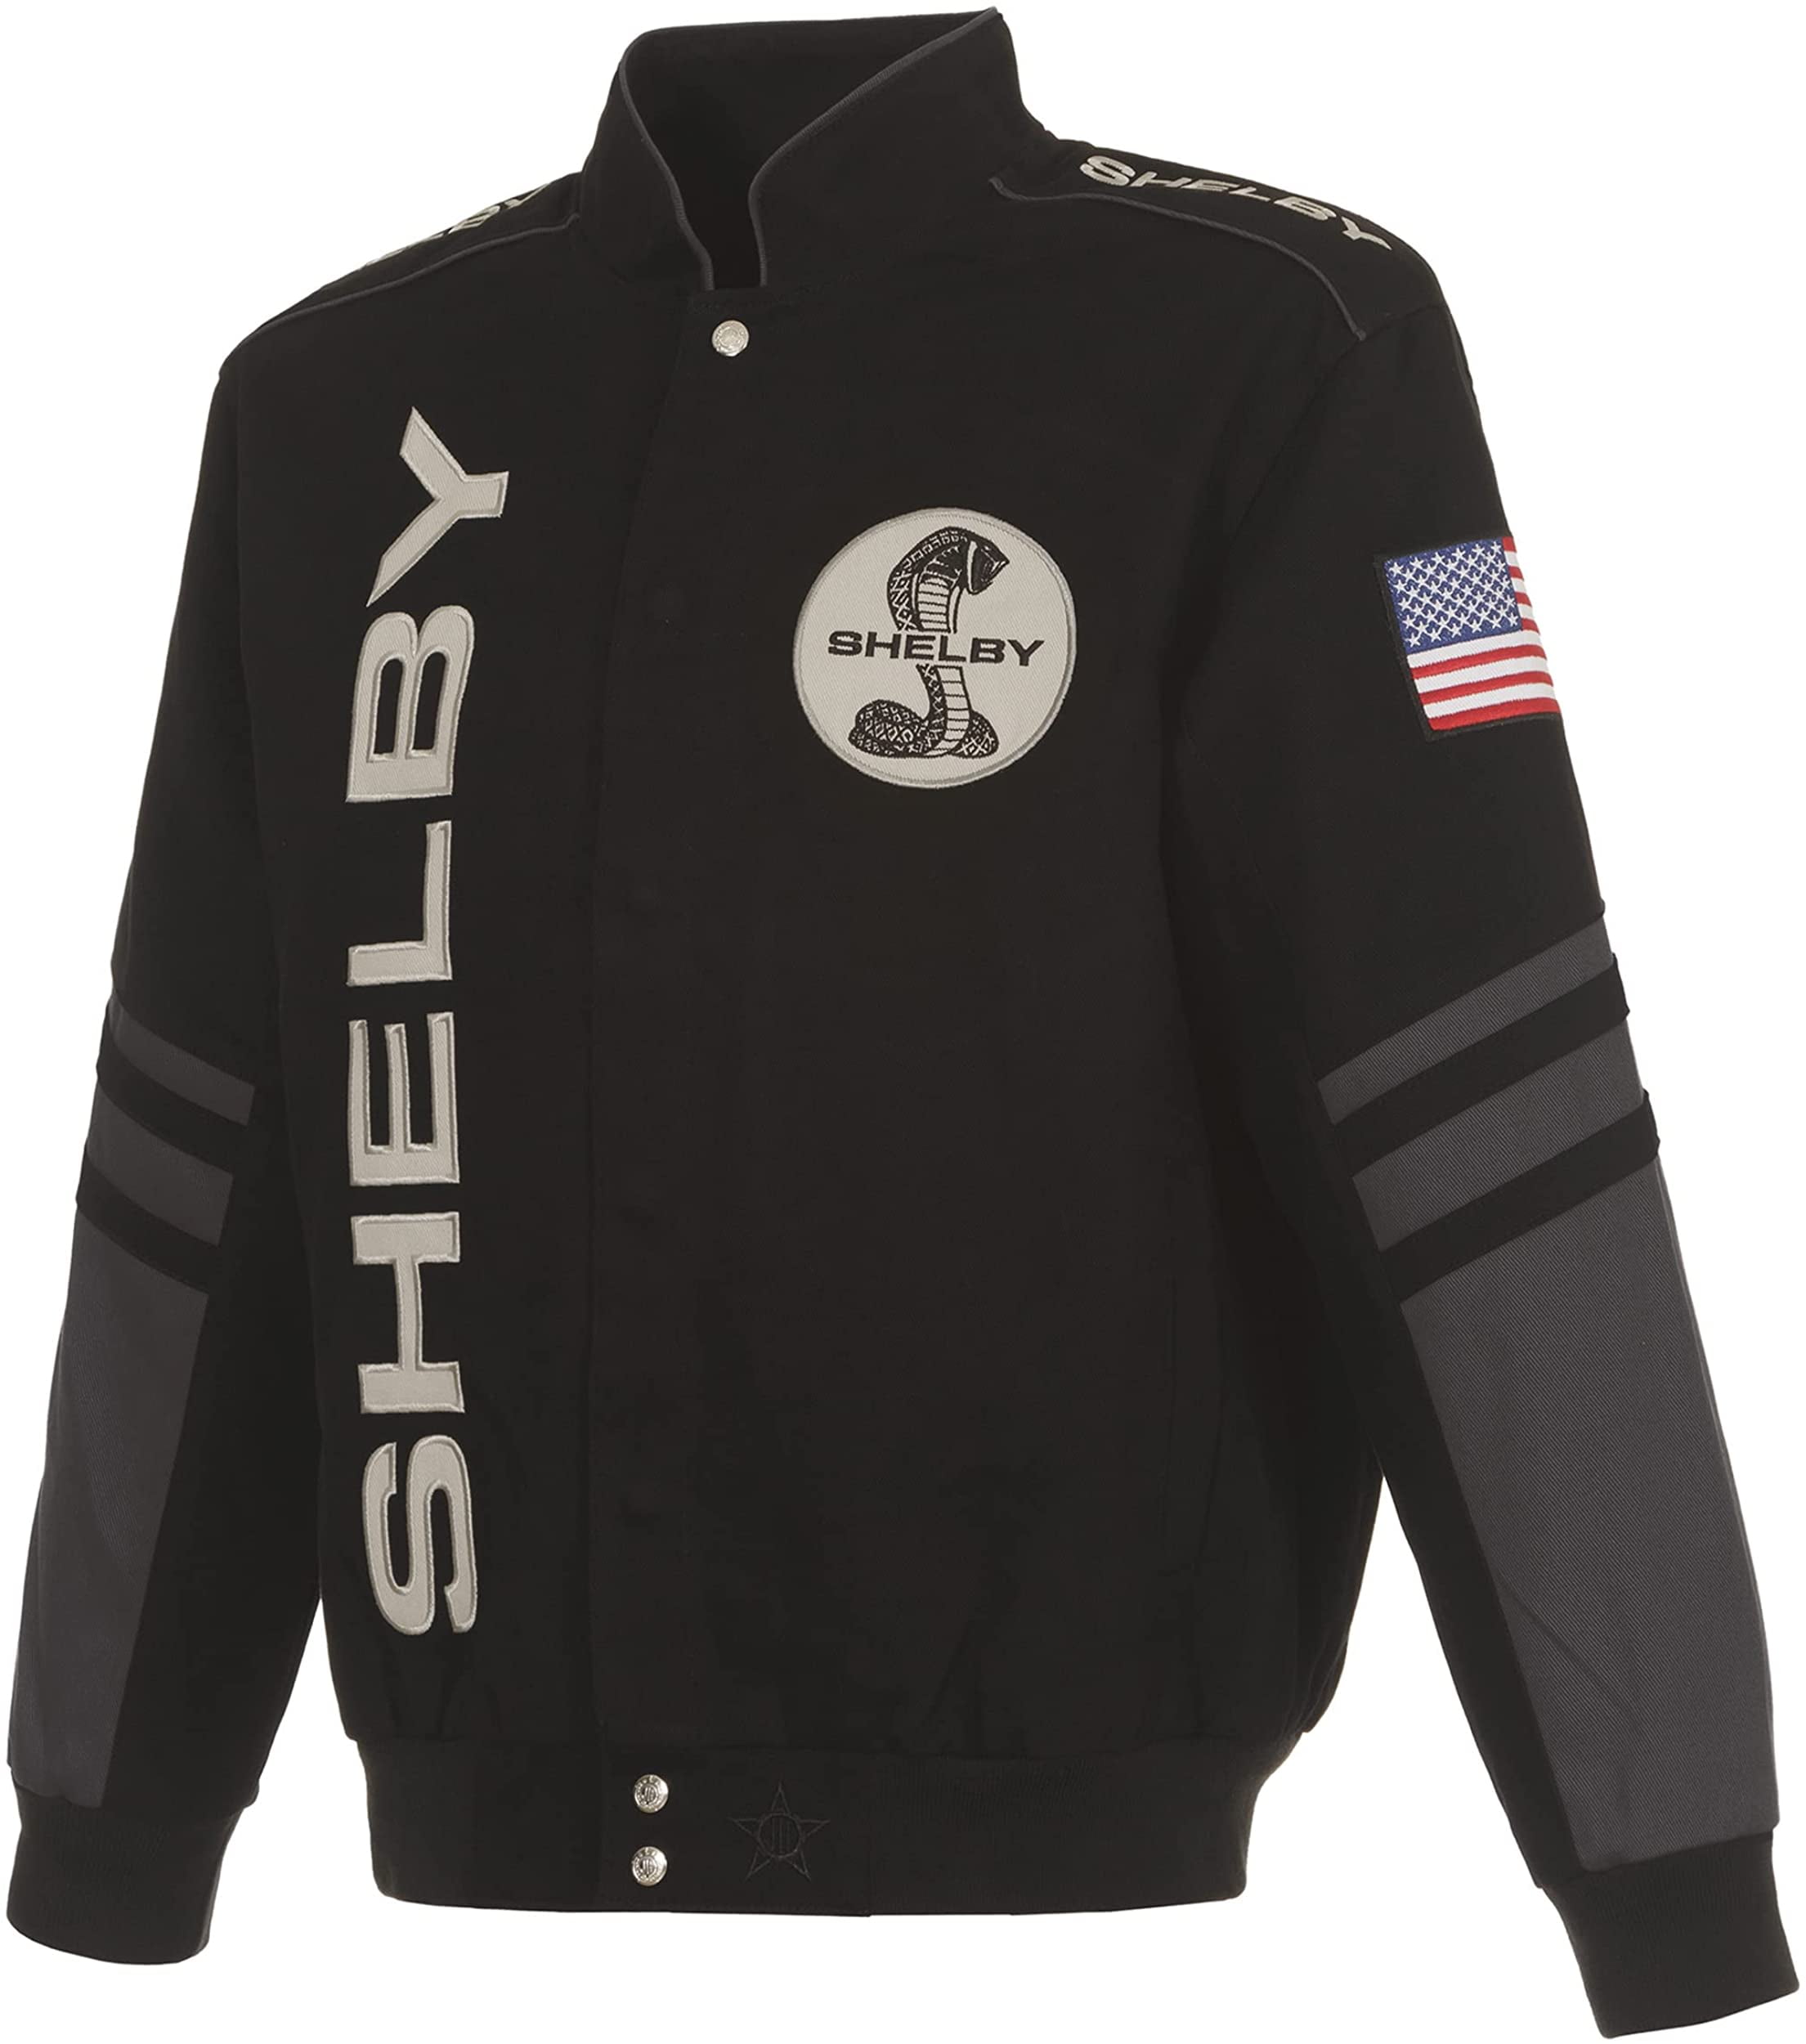 JH Design Men's Shelby Cobra Jacket an Embroidered Classic Twill Coat